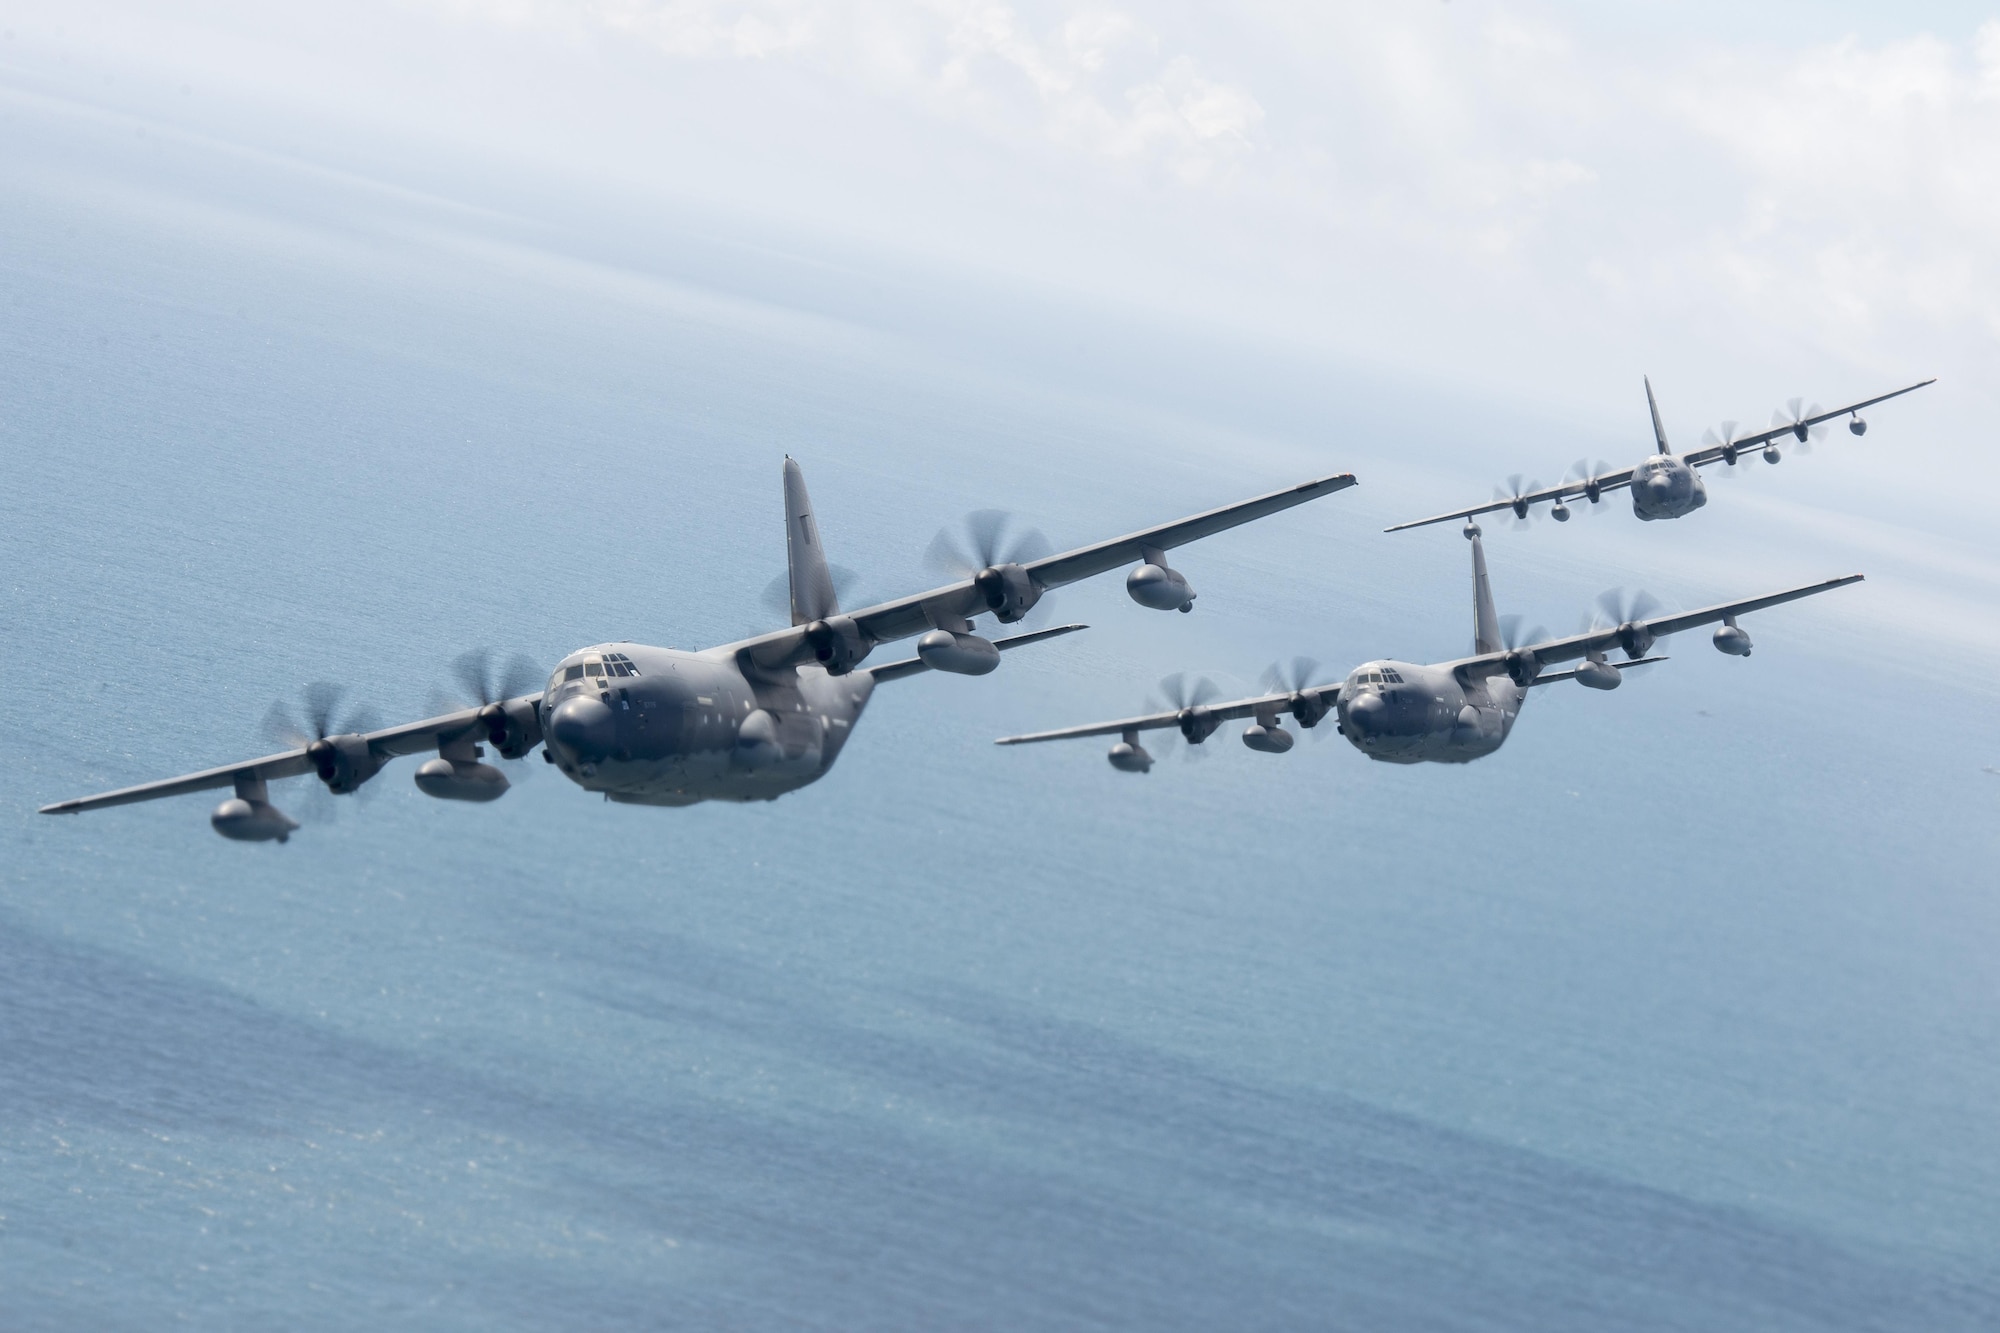 U.S. Air Force MC-130J Commando IIs from the 17th Special Operations Squadron line up in a five-aircraft formation during a mass launch training mission June 22, 2017 off the coast of Okinawa, Japan. Routine flights and airdrops are conducted to maintain proficiency and training certifications for prospective missions. (U.S. Air Force photo by Senior Airman John Linzmeier)